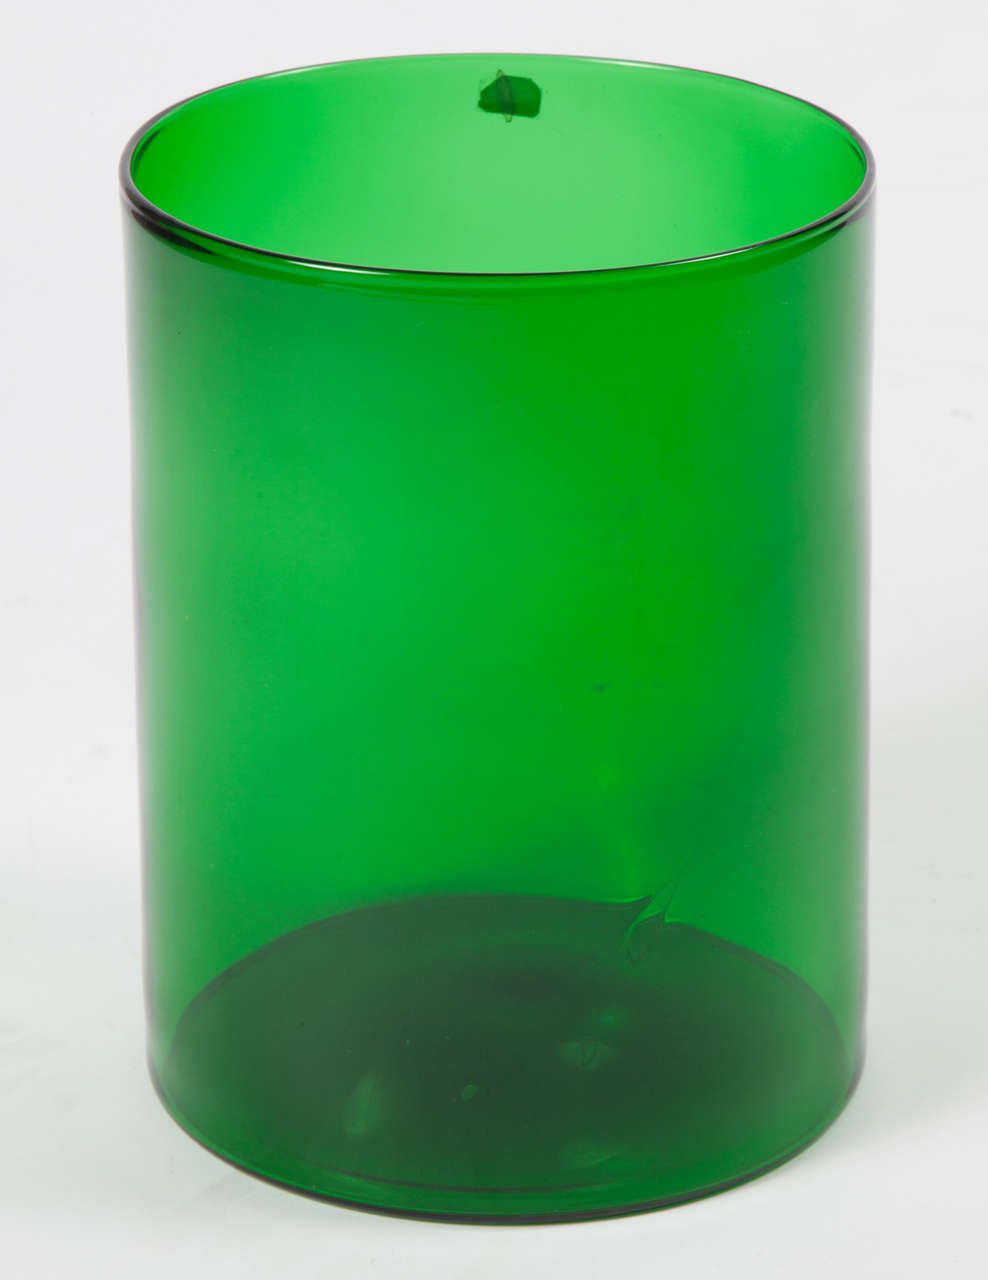 Vintage 1960s Green Glass Cylindrical Vase from Norway

This Retro Green Vase is in excellent condition and goes with ANY style decor. The color is vibrant and can show with light. Decorative or great with water and flowers. Ready for shipping, or